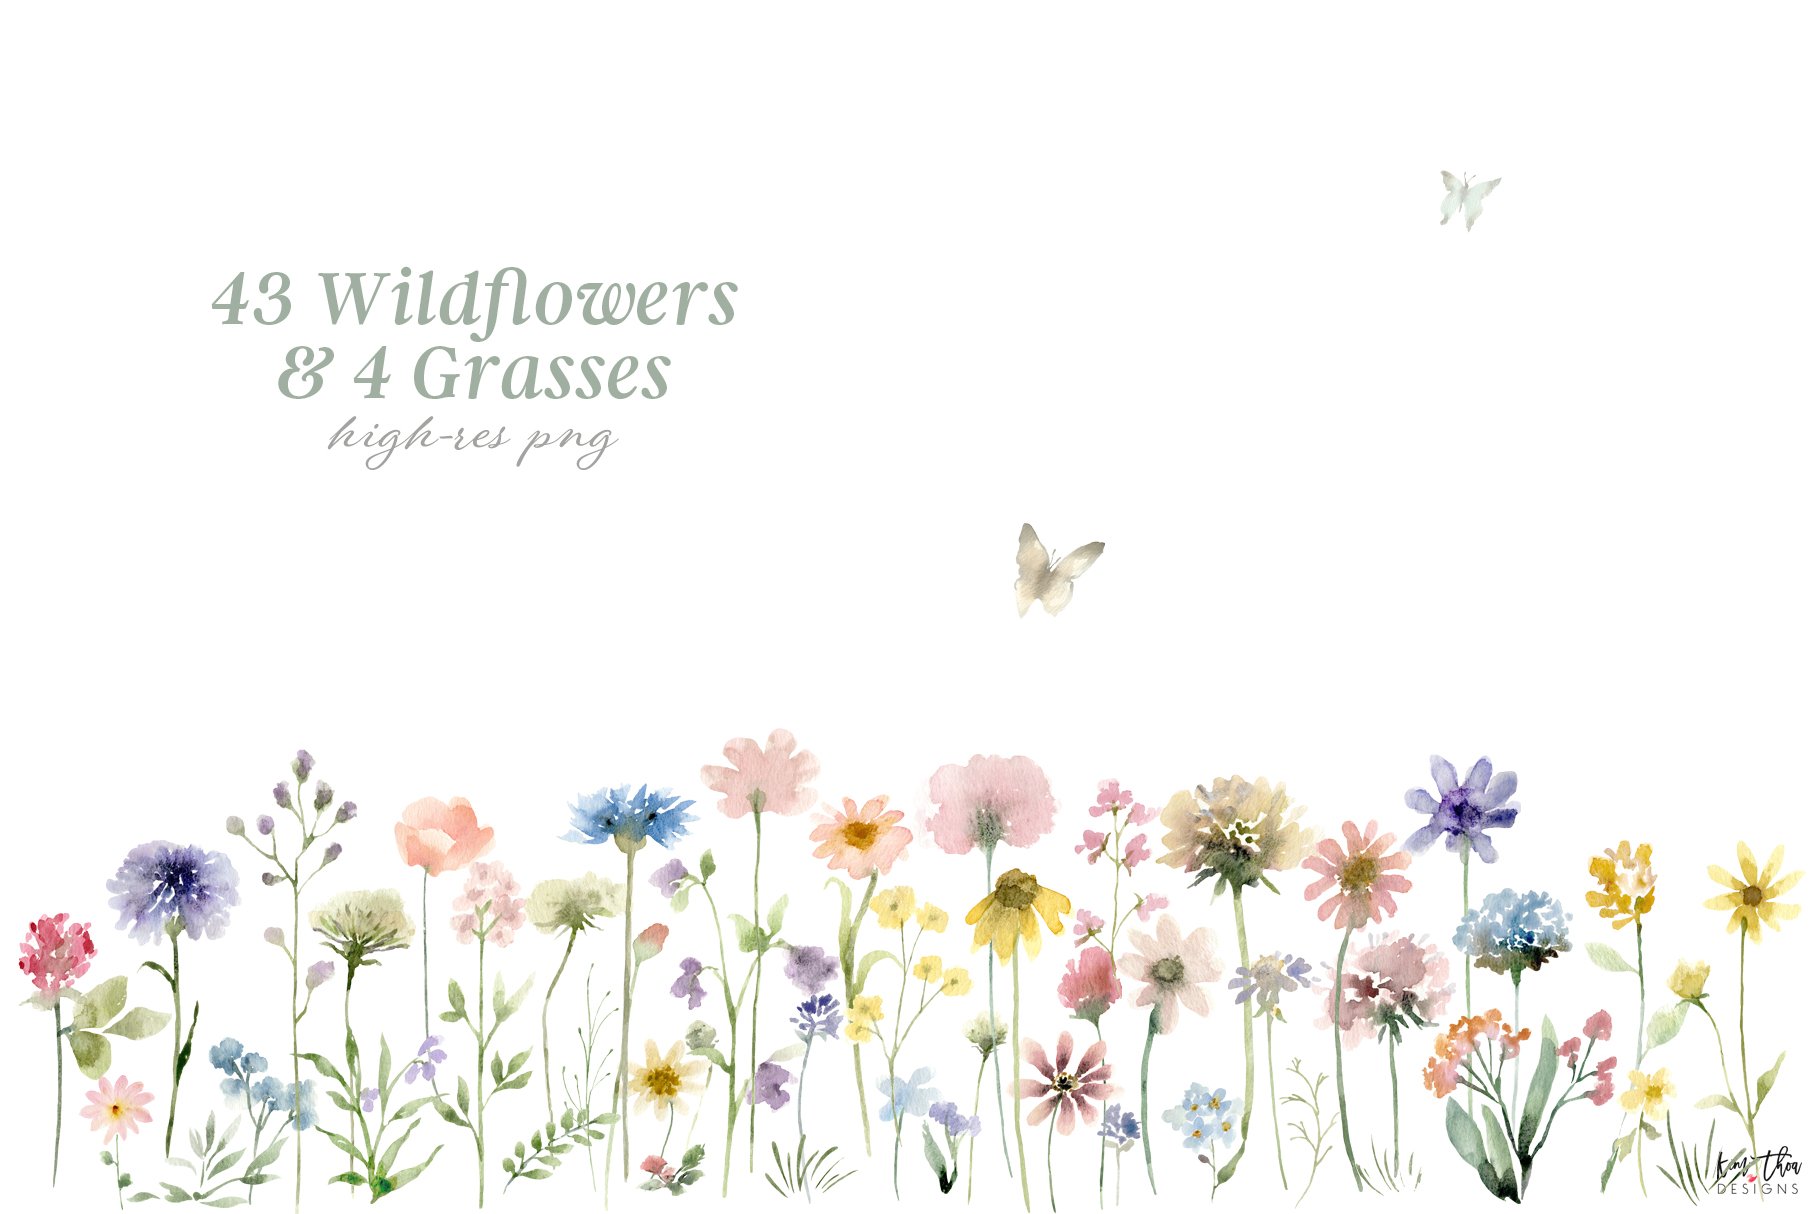 spring meadow thumbnail elements 989